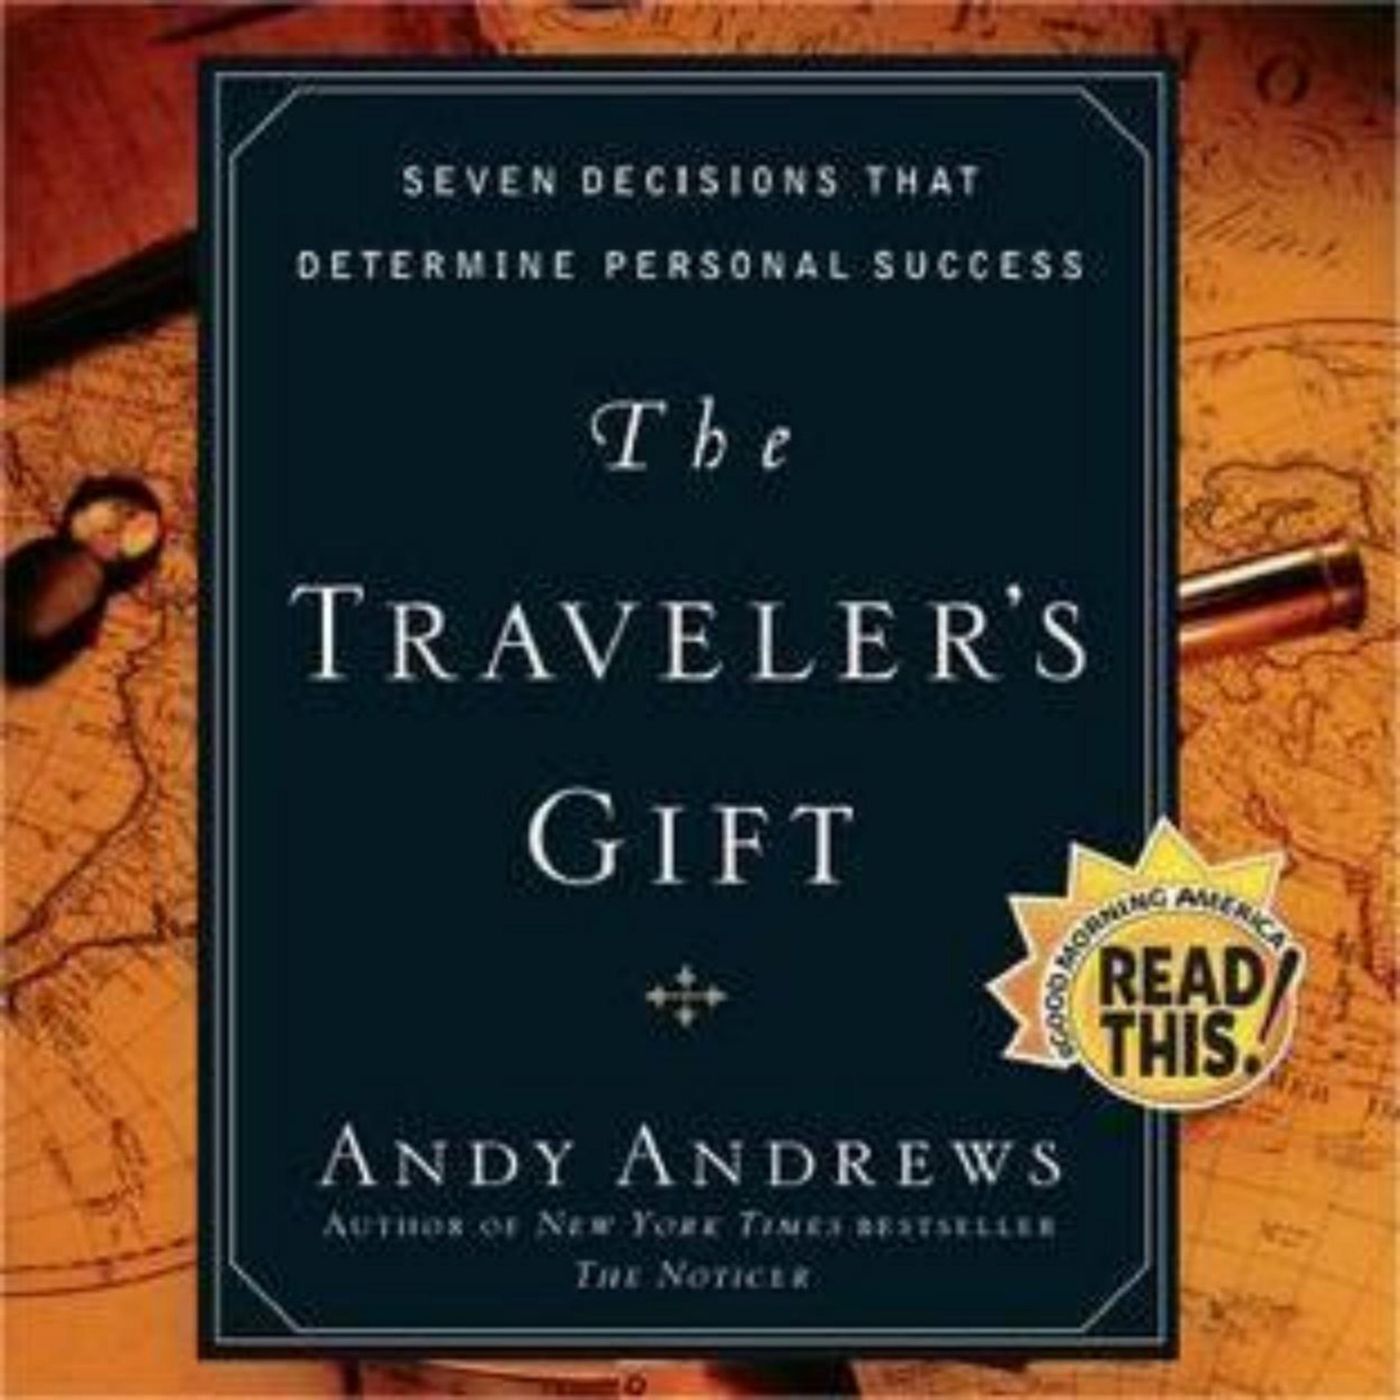 Journey of Discovery: The Traveler's Gift by Andy Andrews